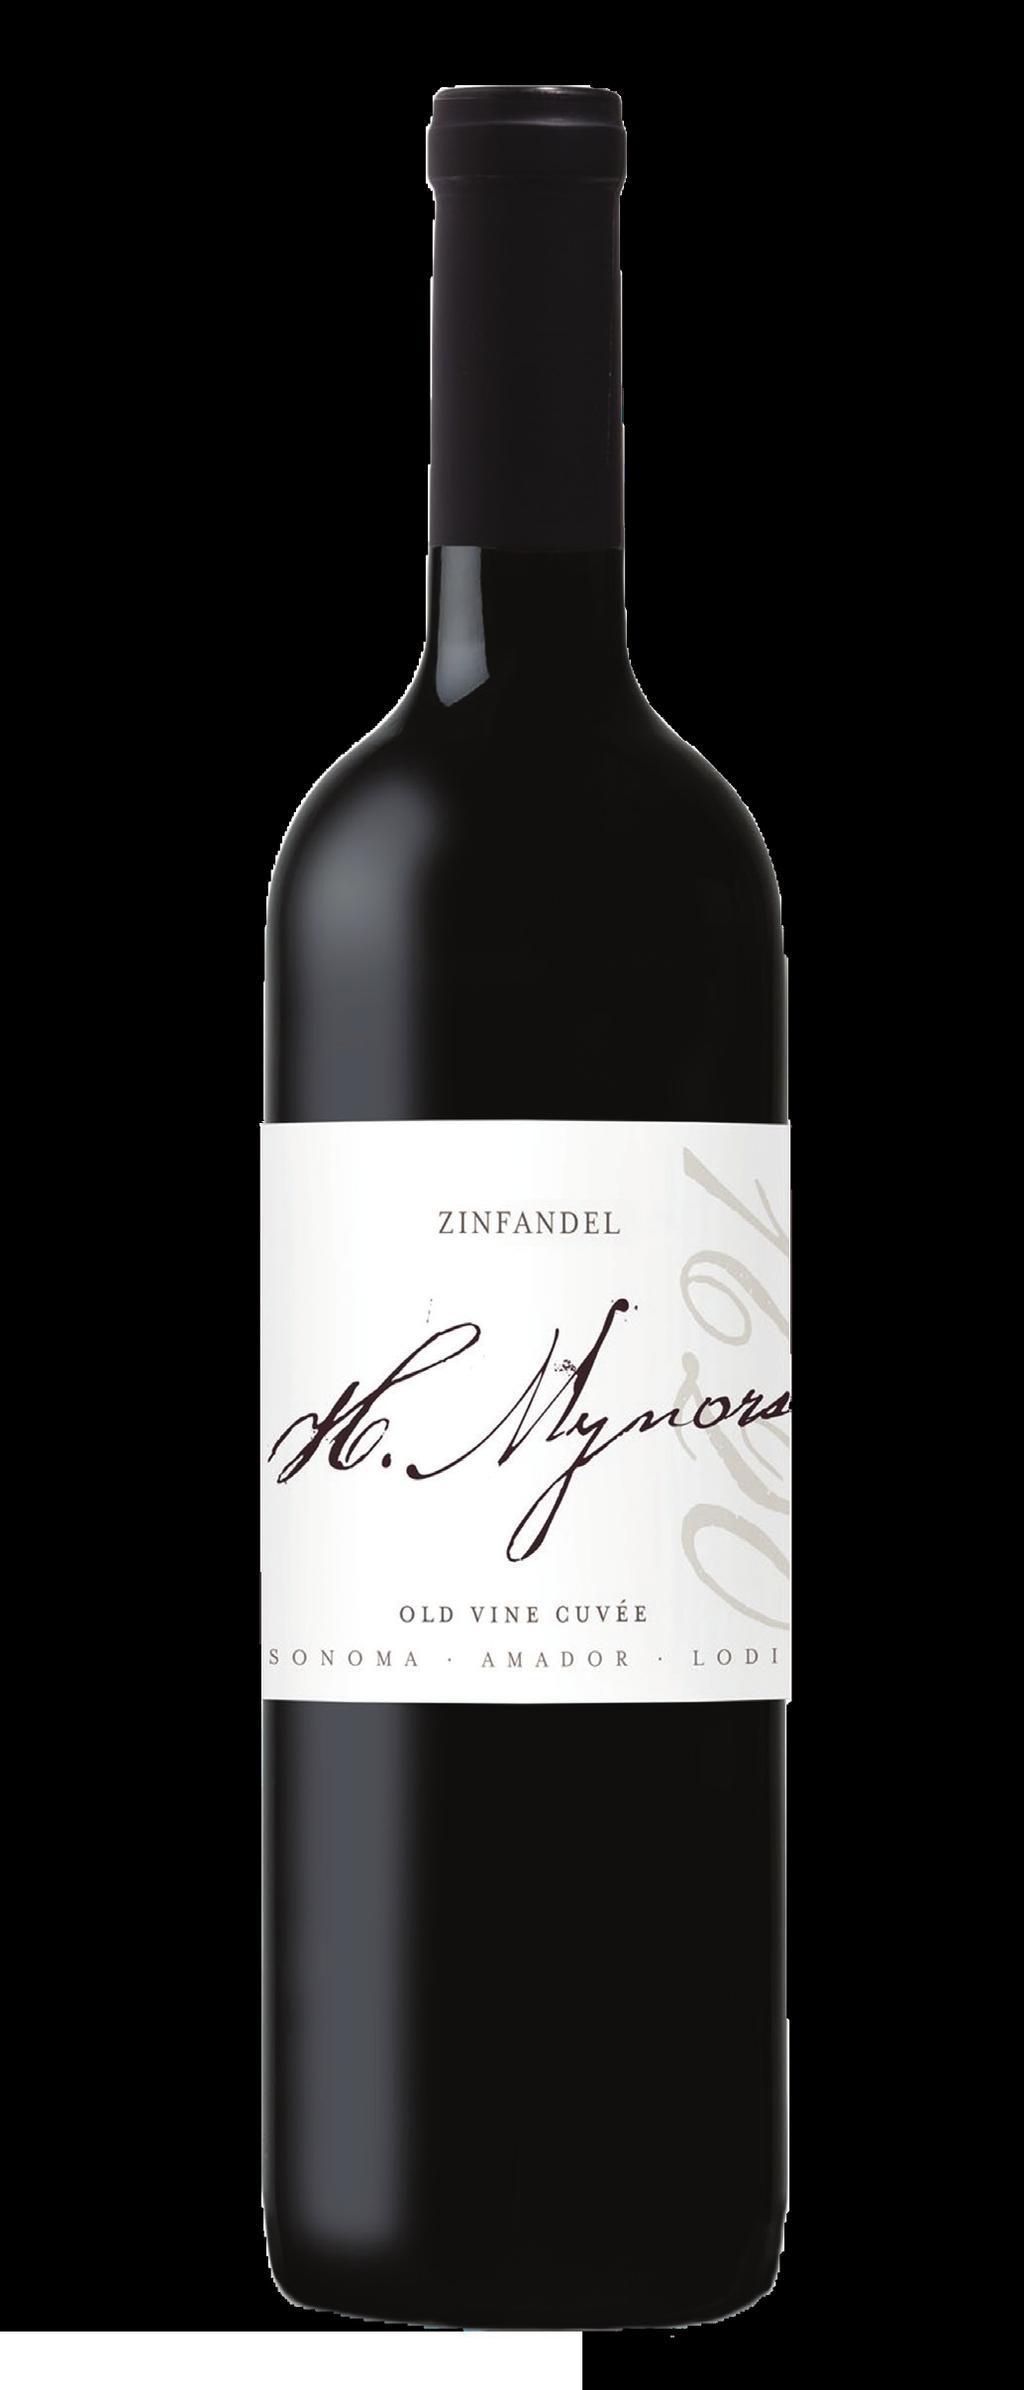 This unique Zinfandel blend is from sites in Sonoma Valley, Dry Creek Valley, Amador County and Lodi.